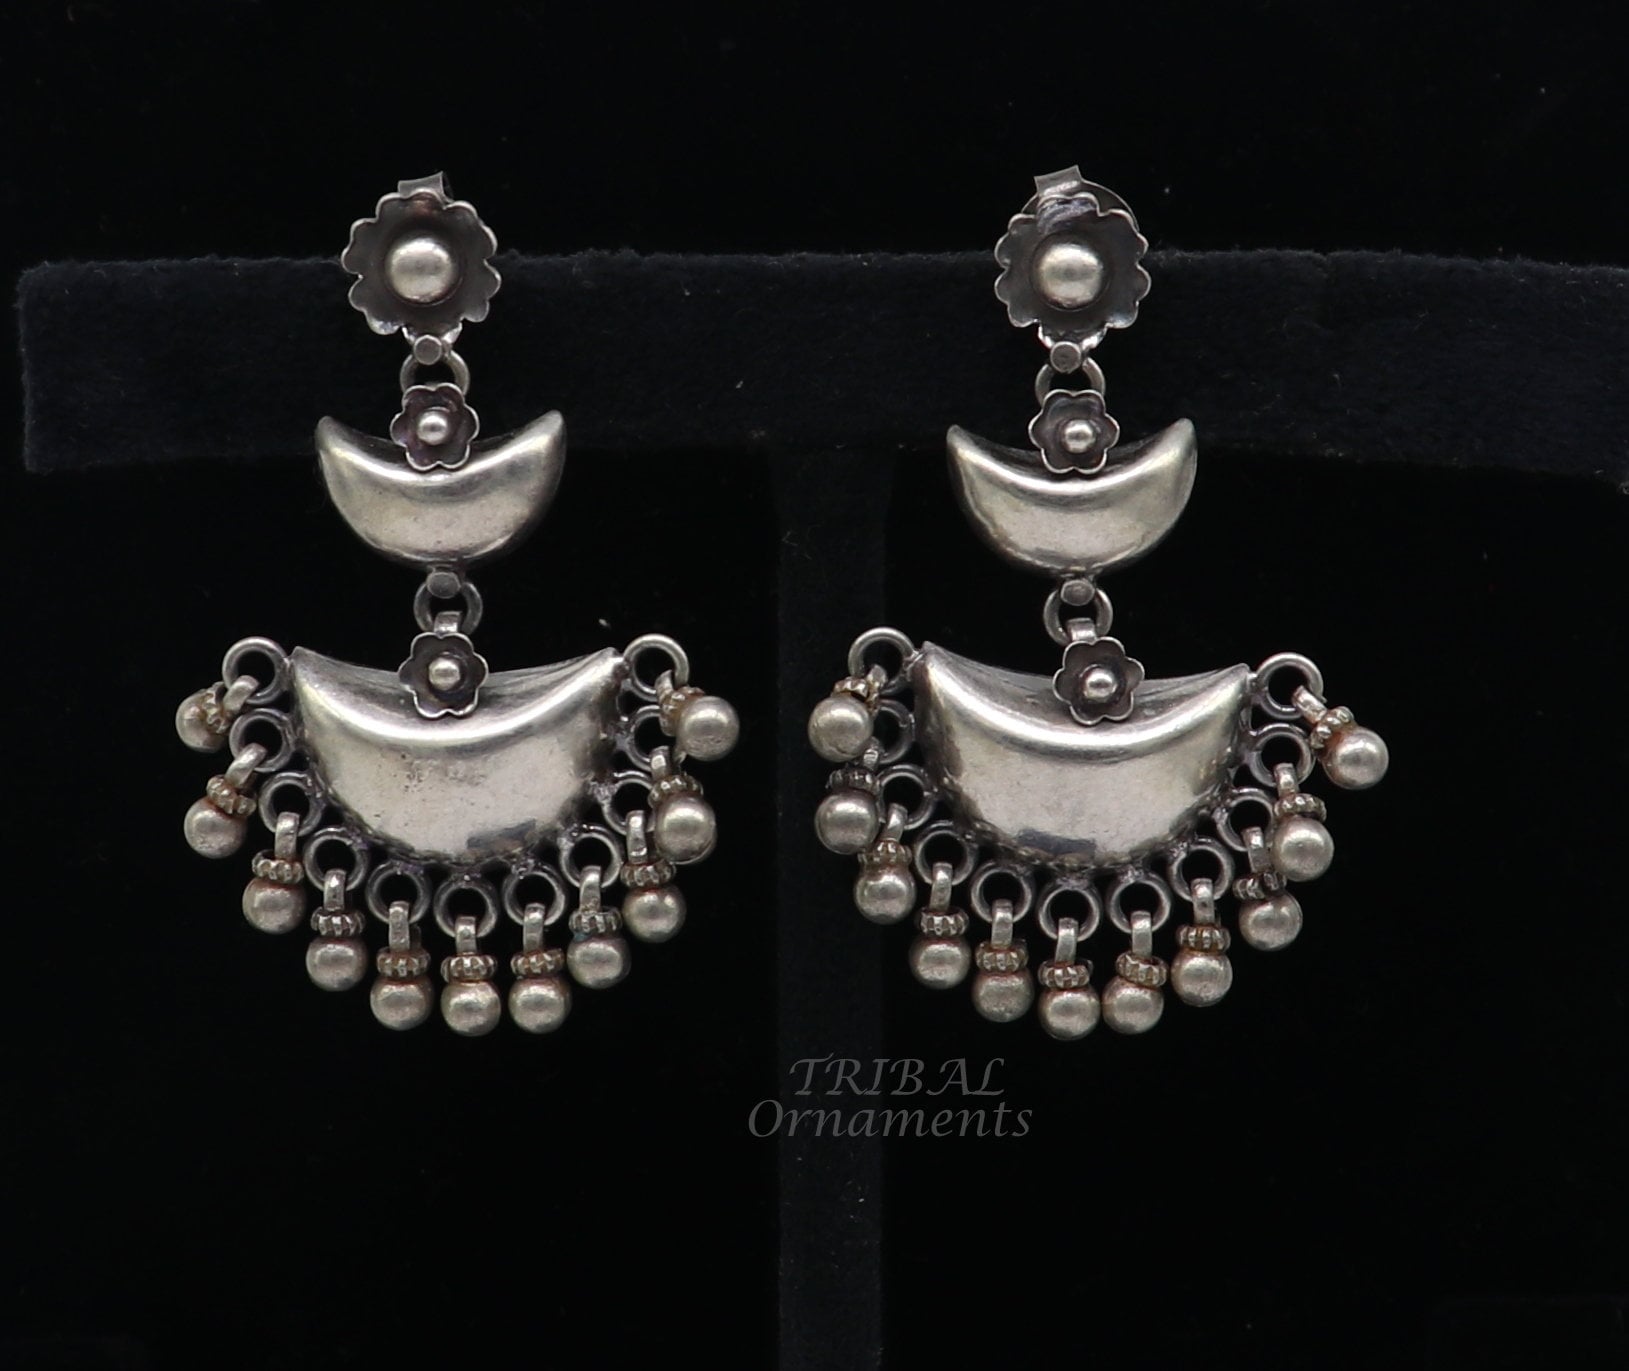 Cultural silver earrings, fashionable and versatile floral silver 3 steps drop dangles ethnic pattern made by 925 sterling silver s1114 - TRIBAL ORNAMENTS